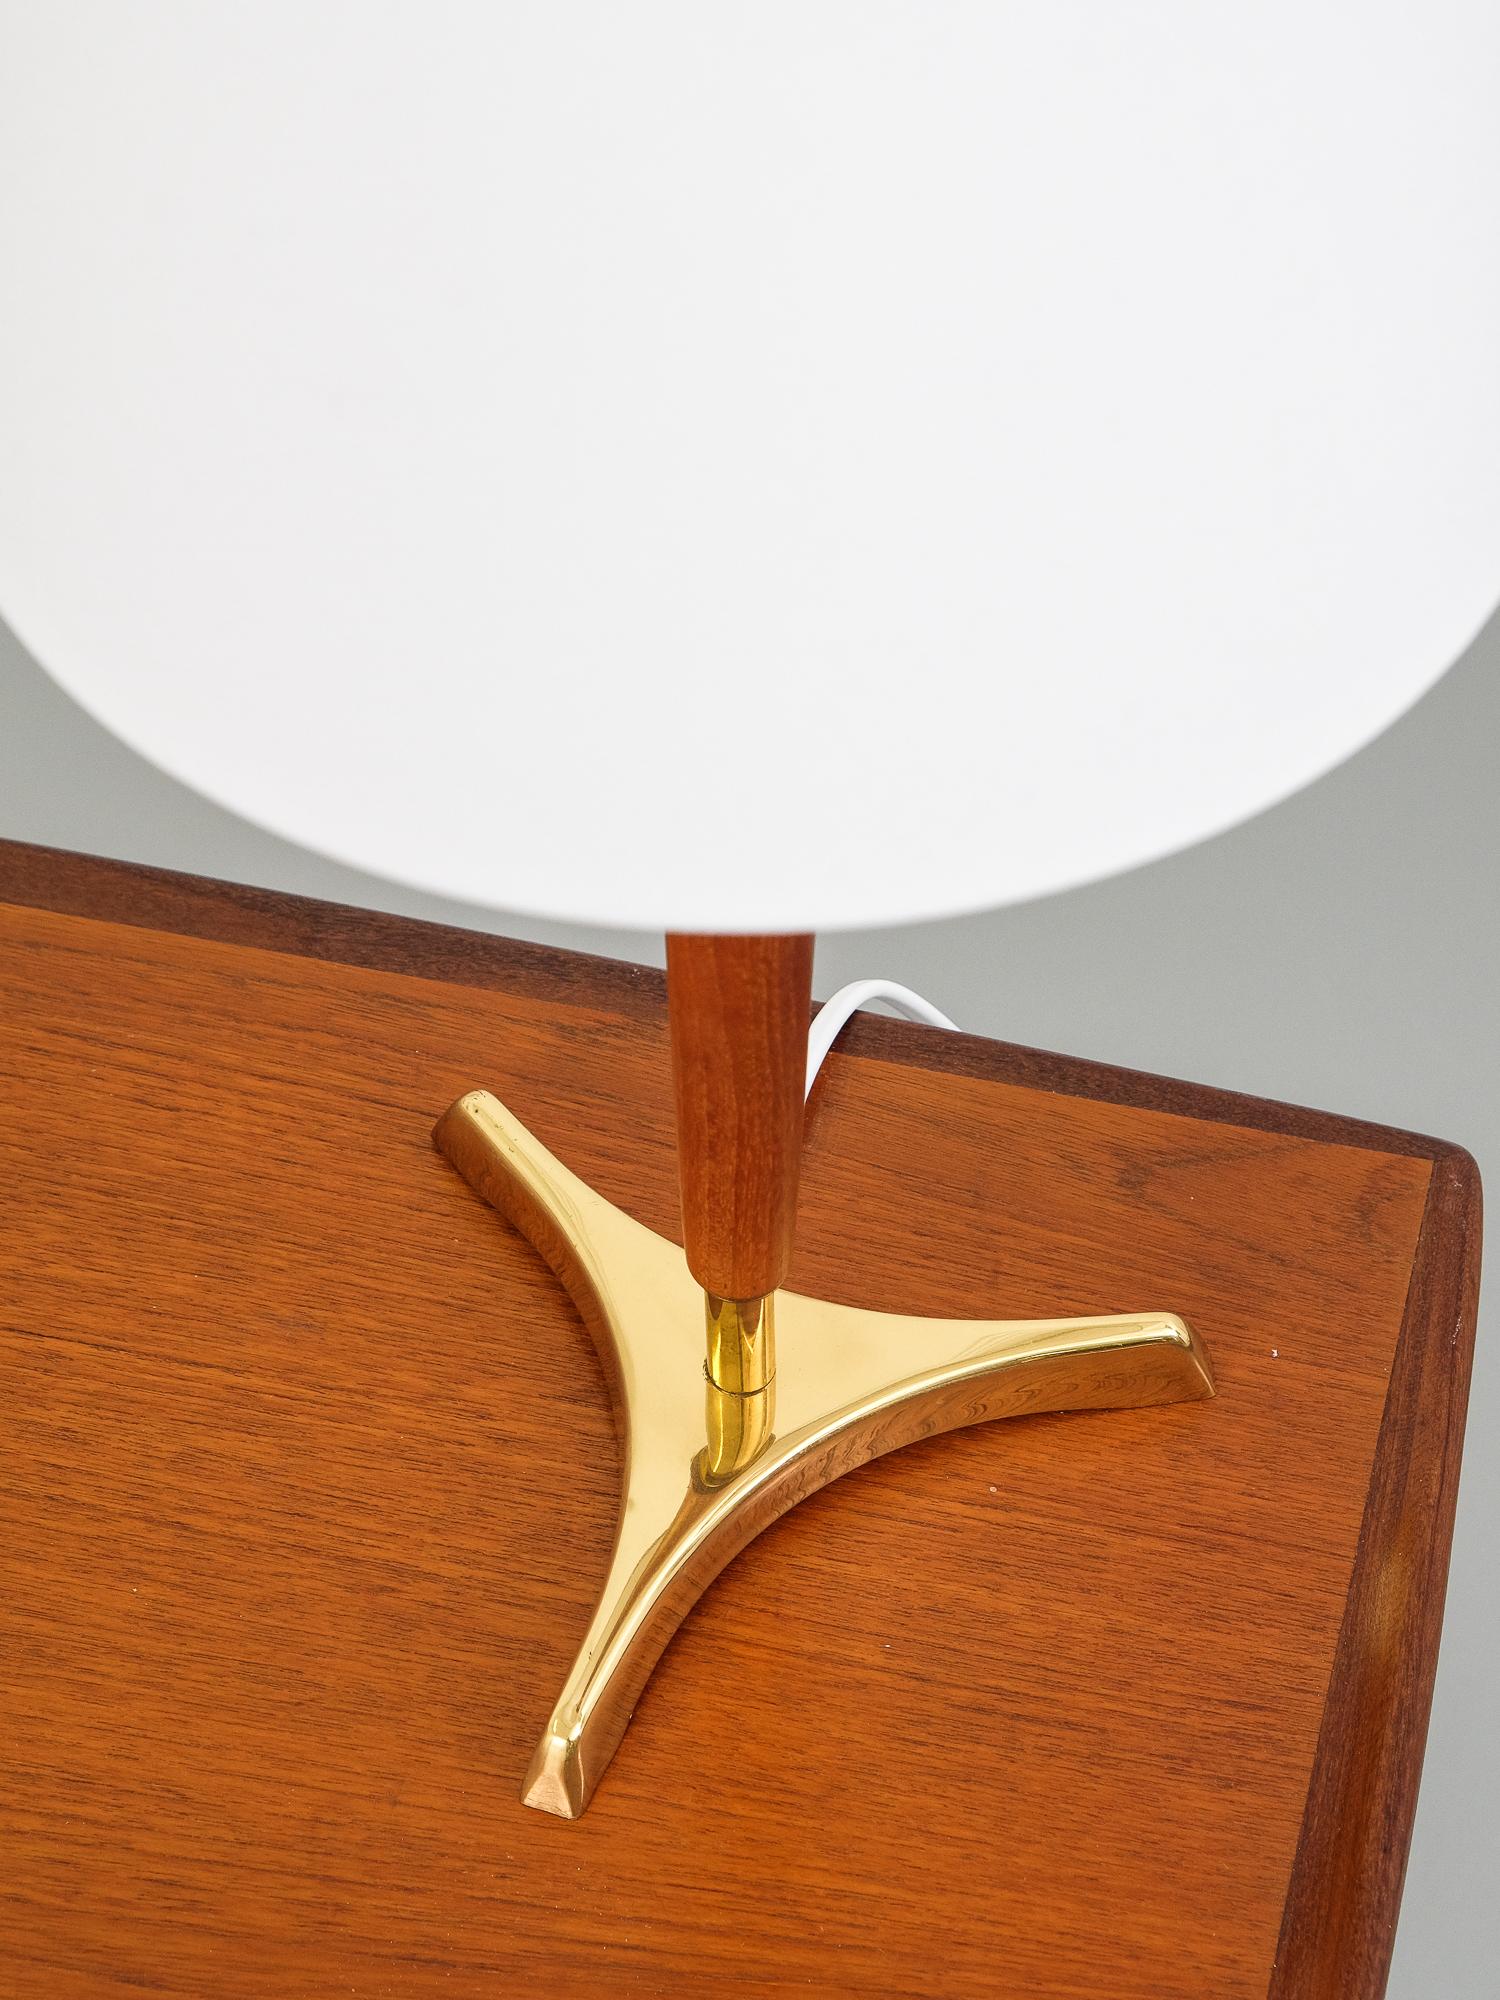 1950s Scandinavian brass and teak table lamp. Unknown manufacturer.

Good condition. Ungrounded wiring. E27 bulb socket.

Height with shade 48 cm.